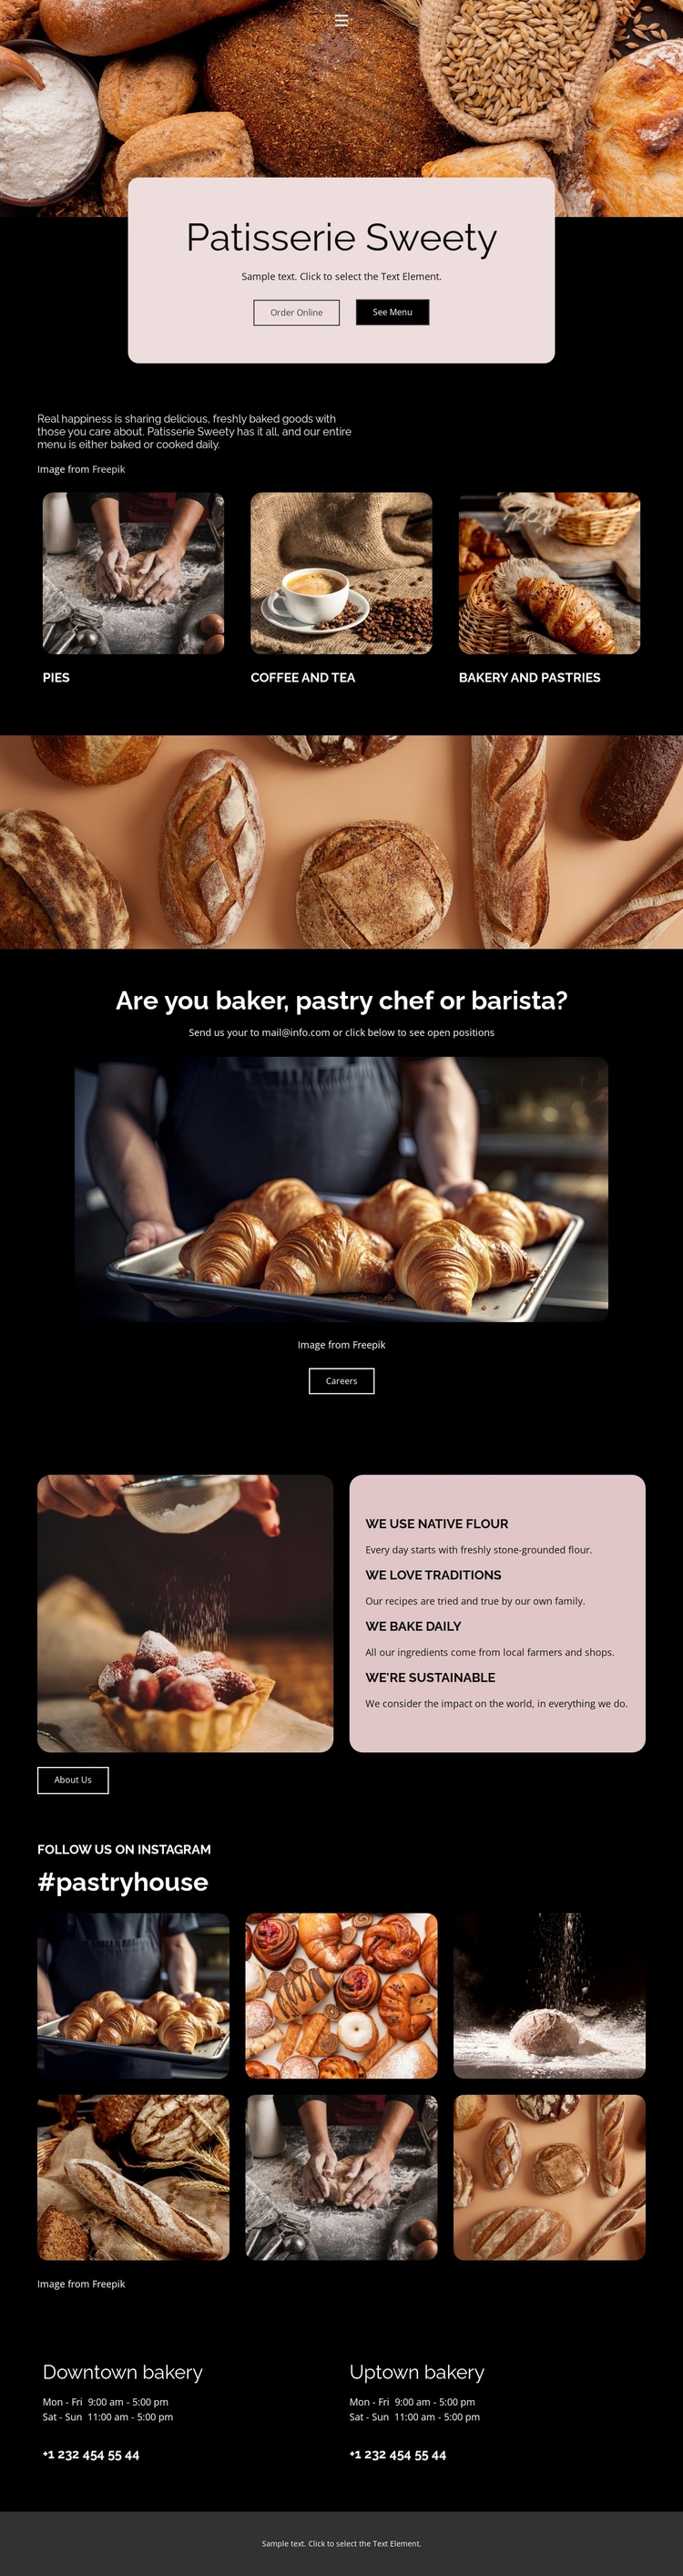 We love traditions Website Template